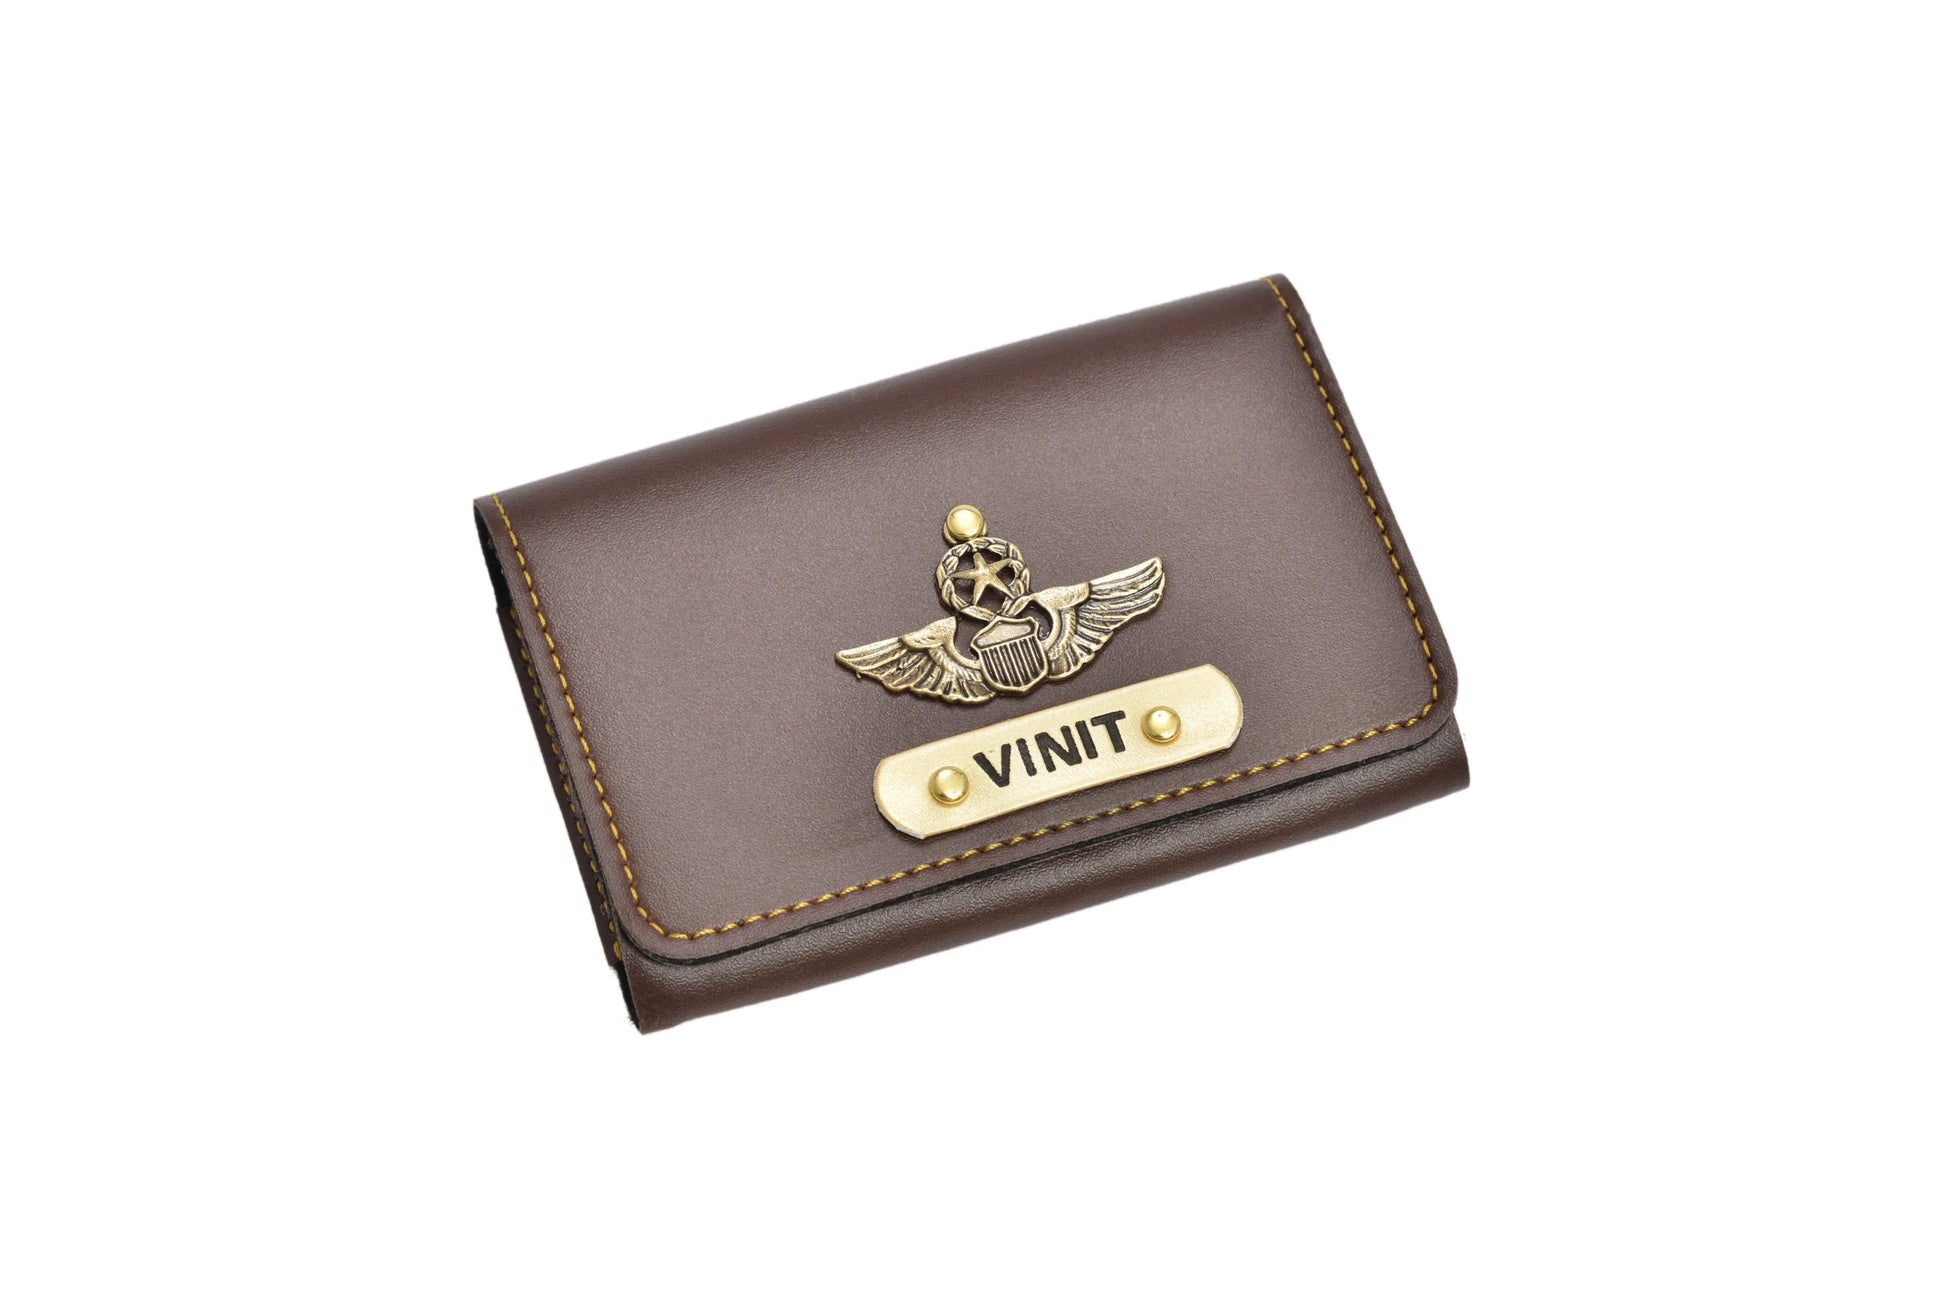 Carry your contact information in style with this personalized visiting card holder.